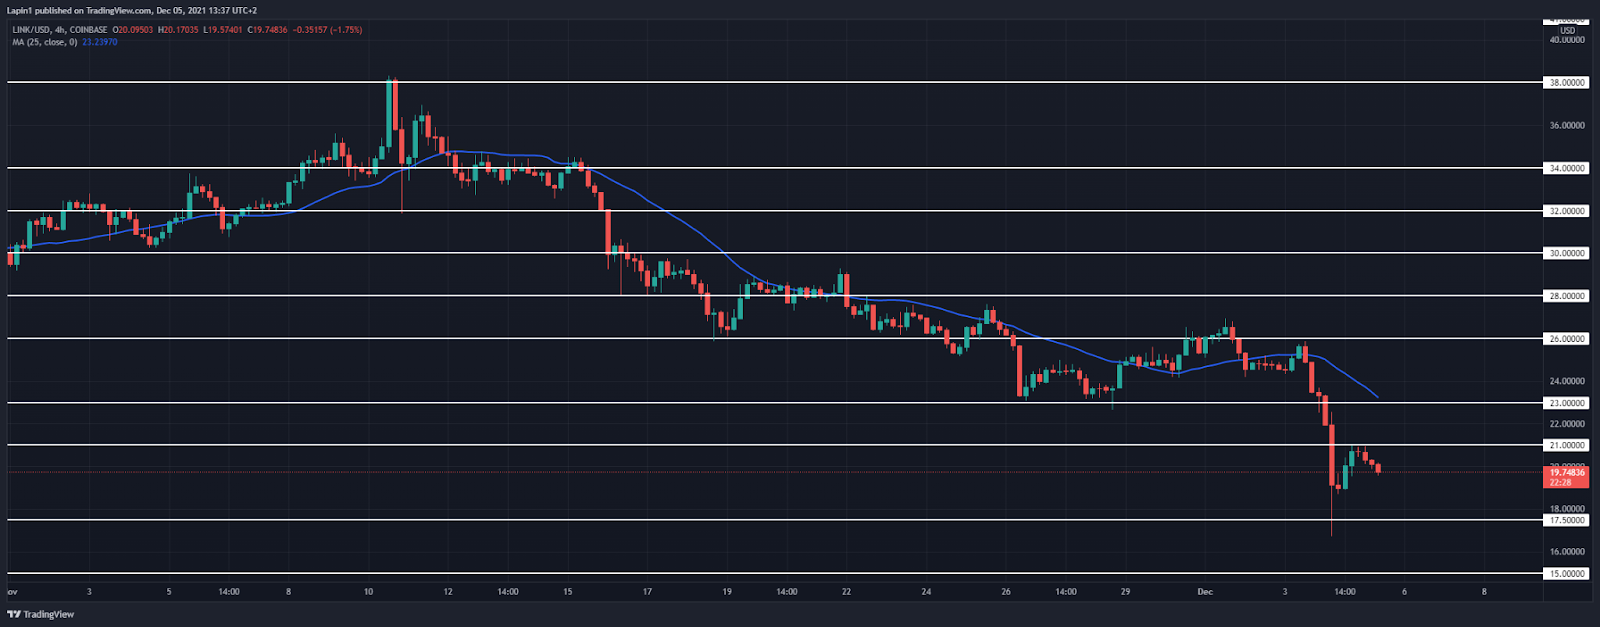 Chainlink Price Analysis: LINK retraces to $21, looks to head lower again?